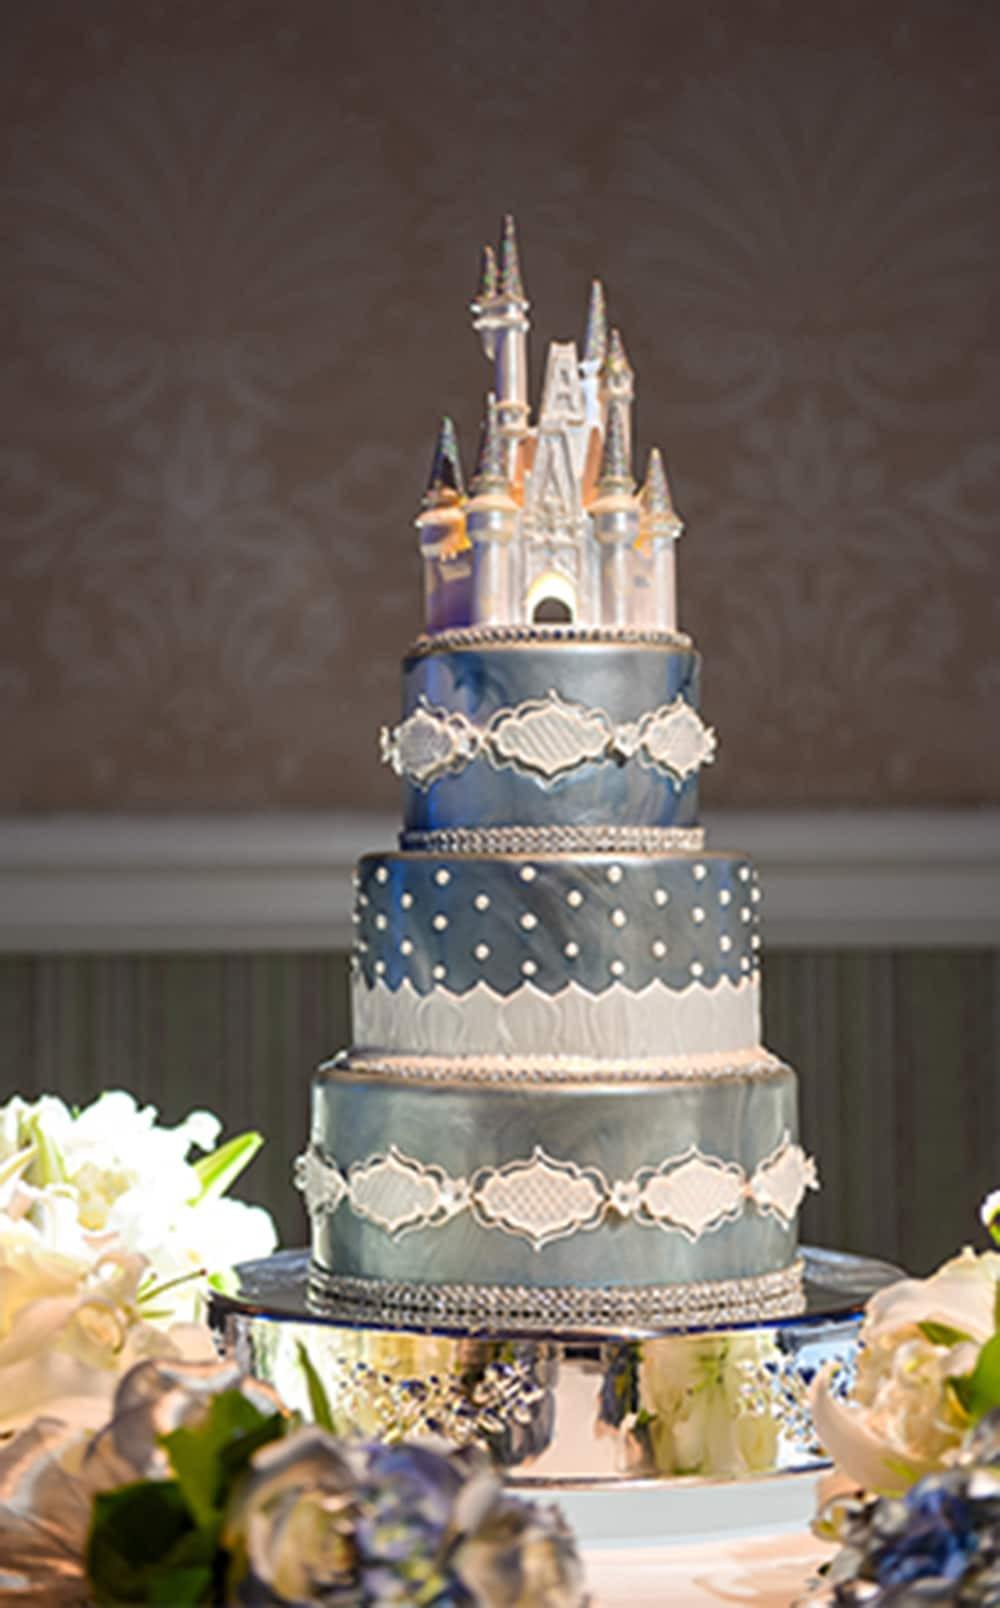 Disney Themed Wedding Cakes
 Fall in Love With These Disney Inspired Wedding Cakes